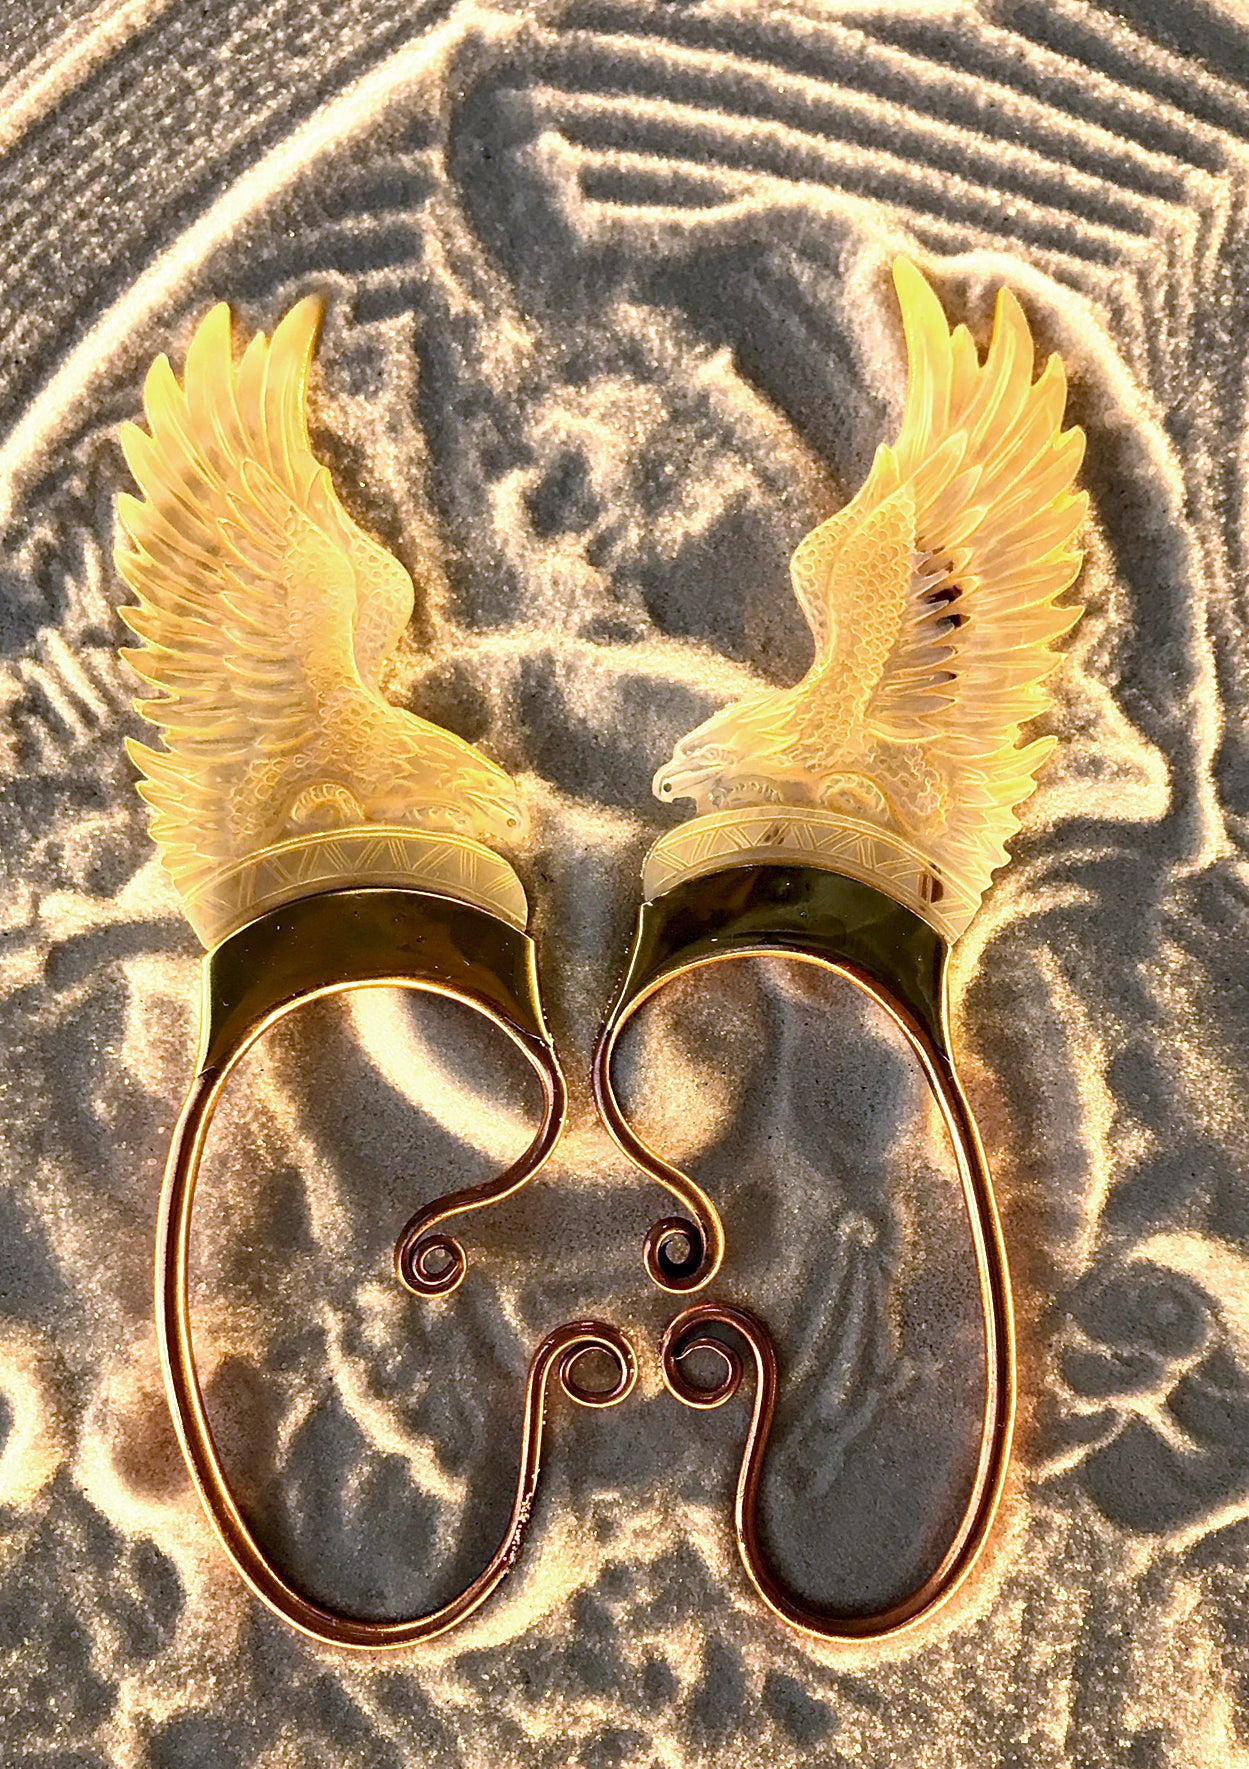 Eagle Wing Ear Cuffs - Light Mother of Pearl